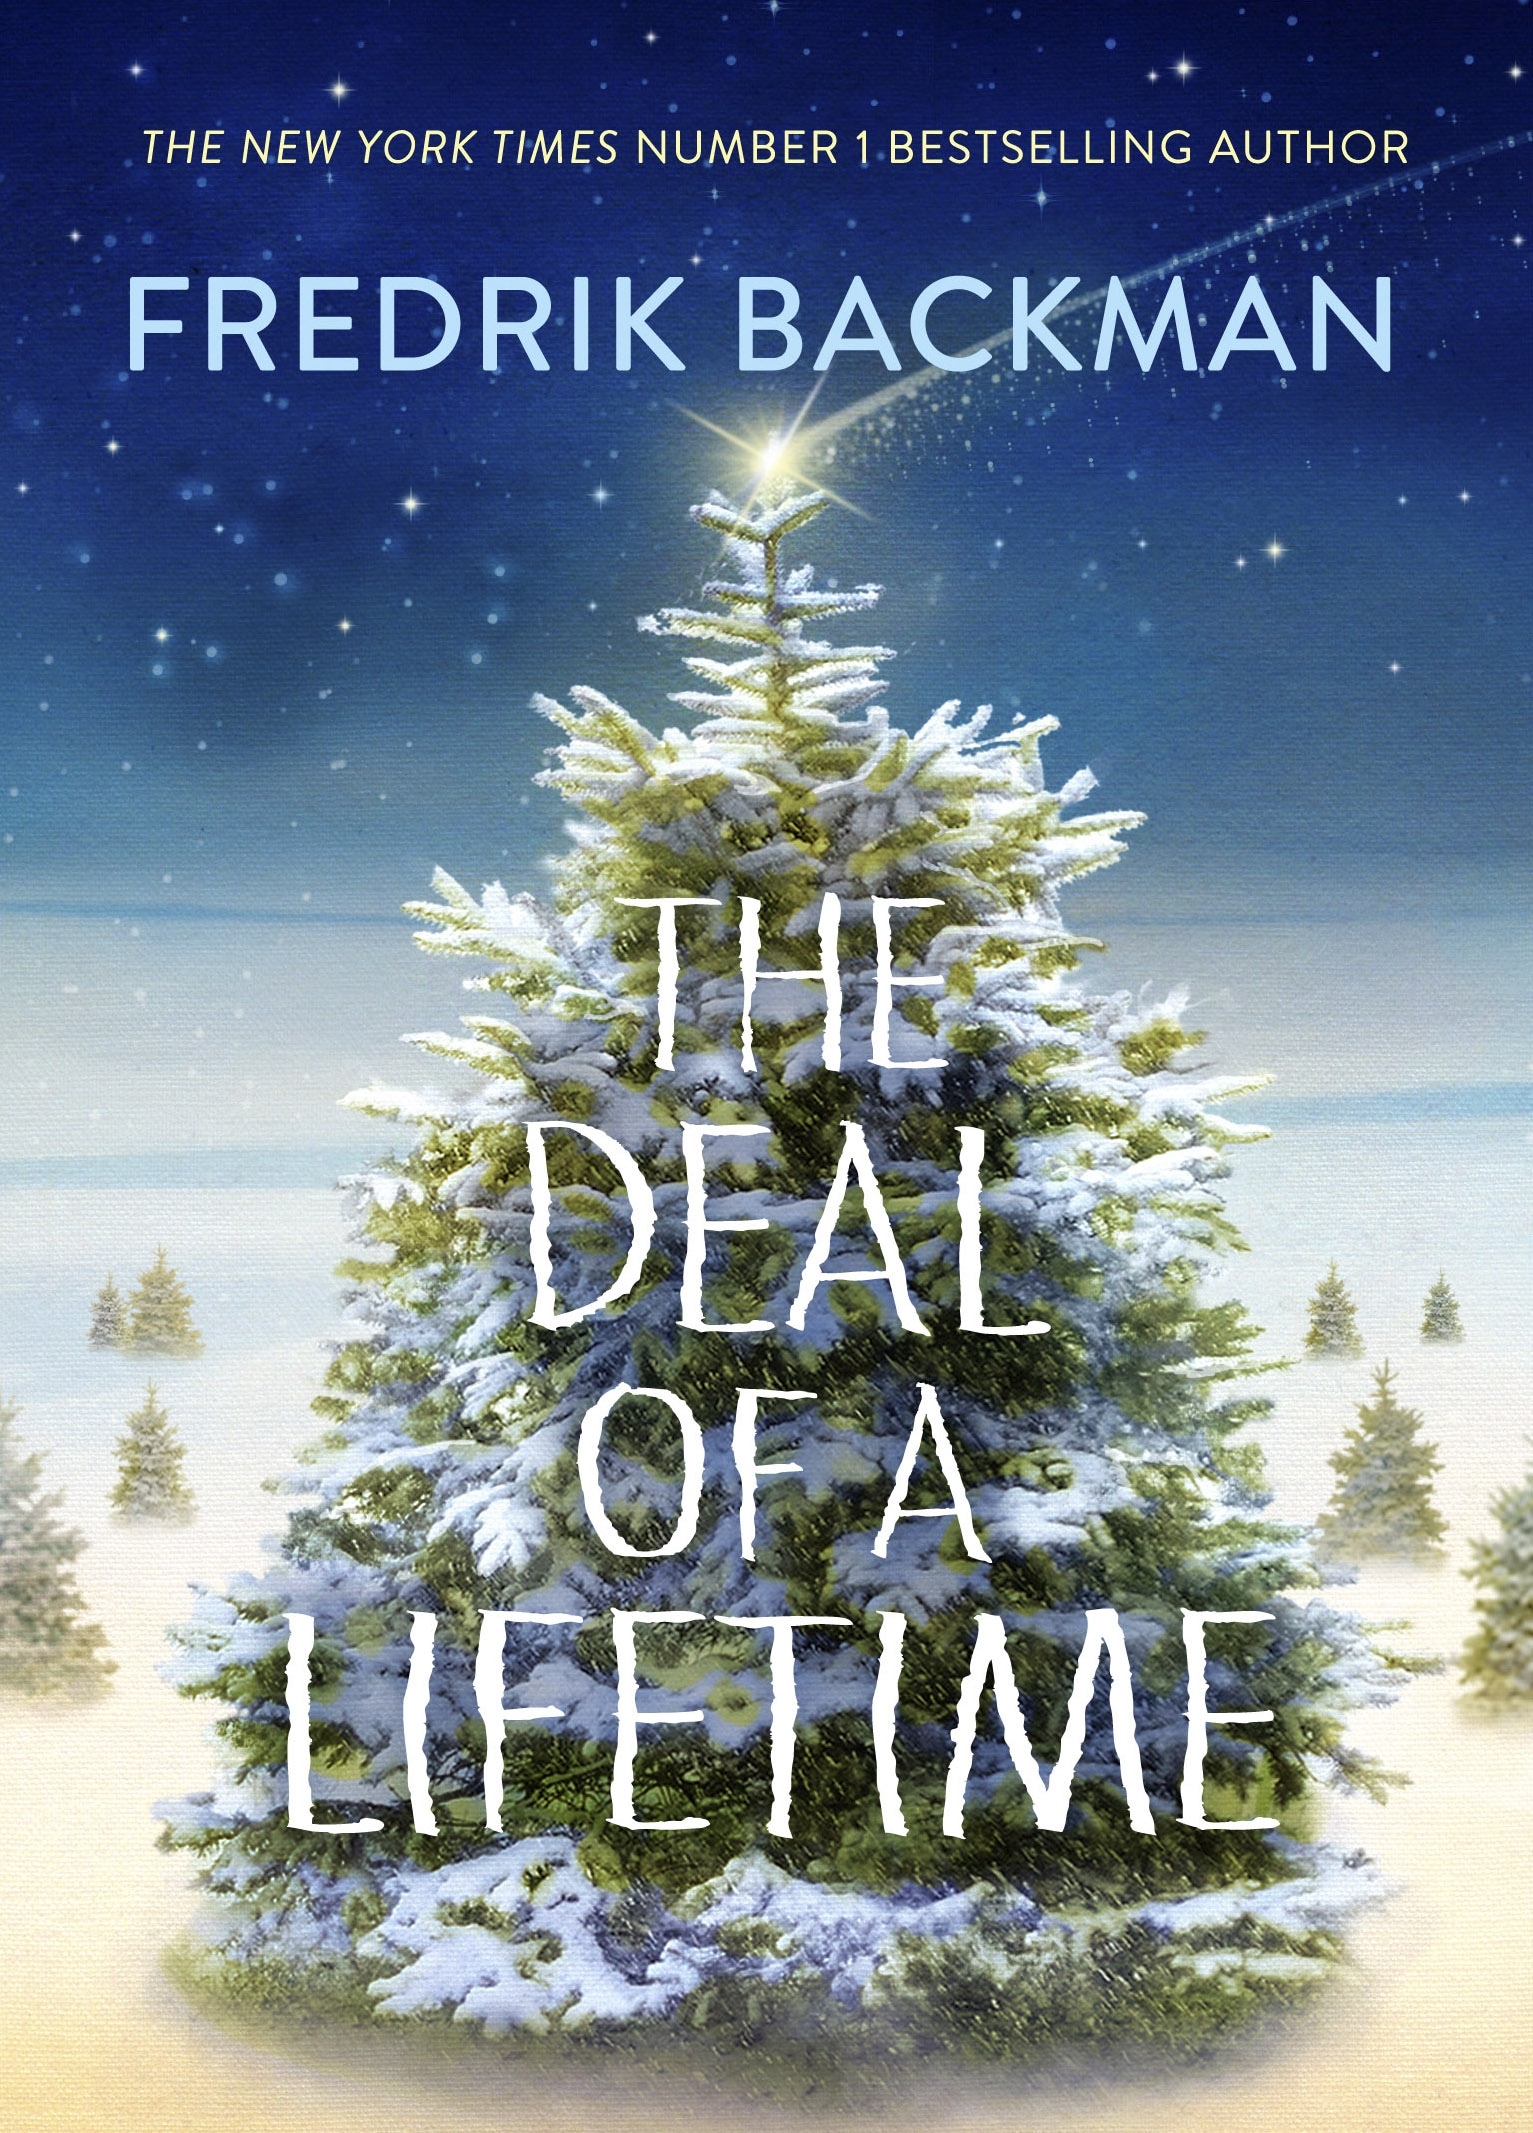 Book “The Deal Of A Lifetime” by Fredrik Backman — October 18, 2018